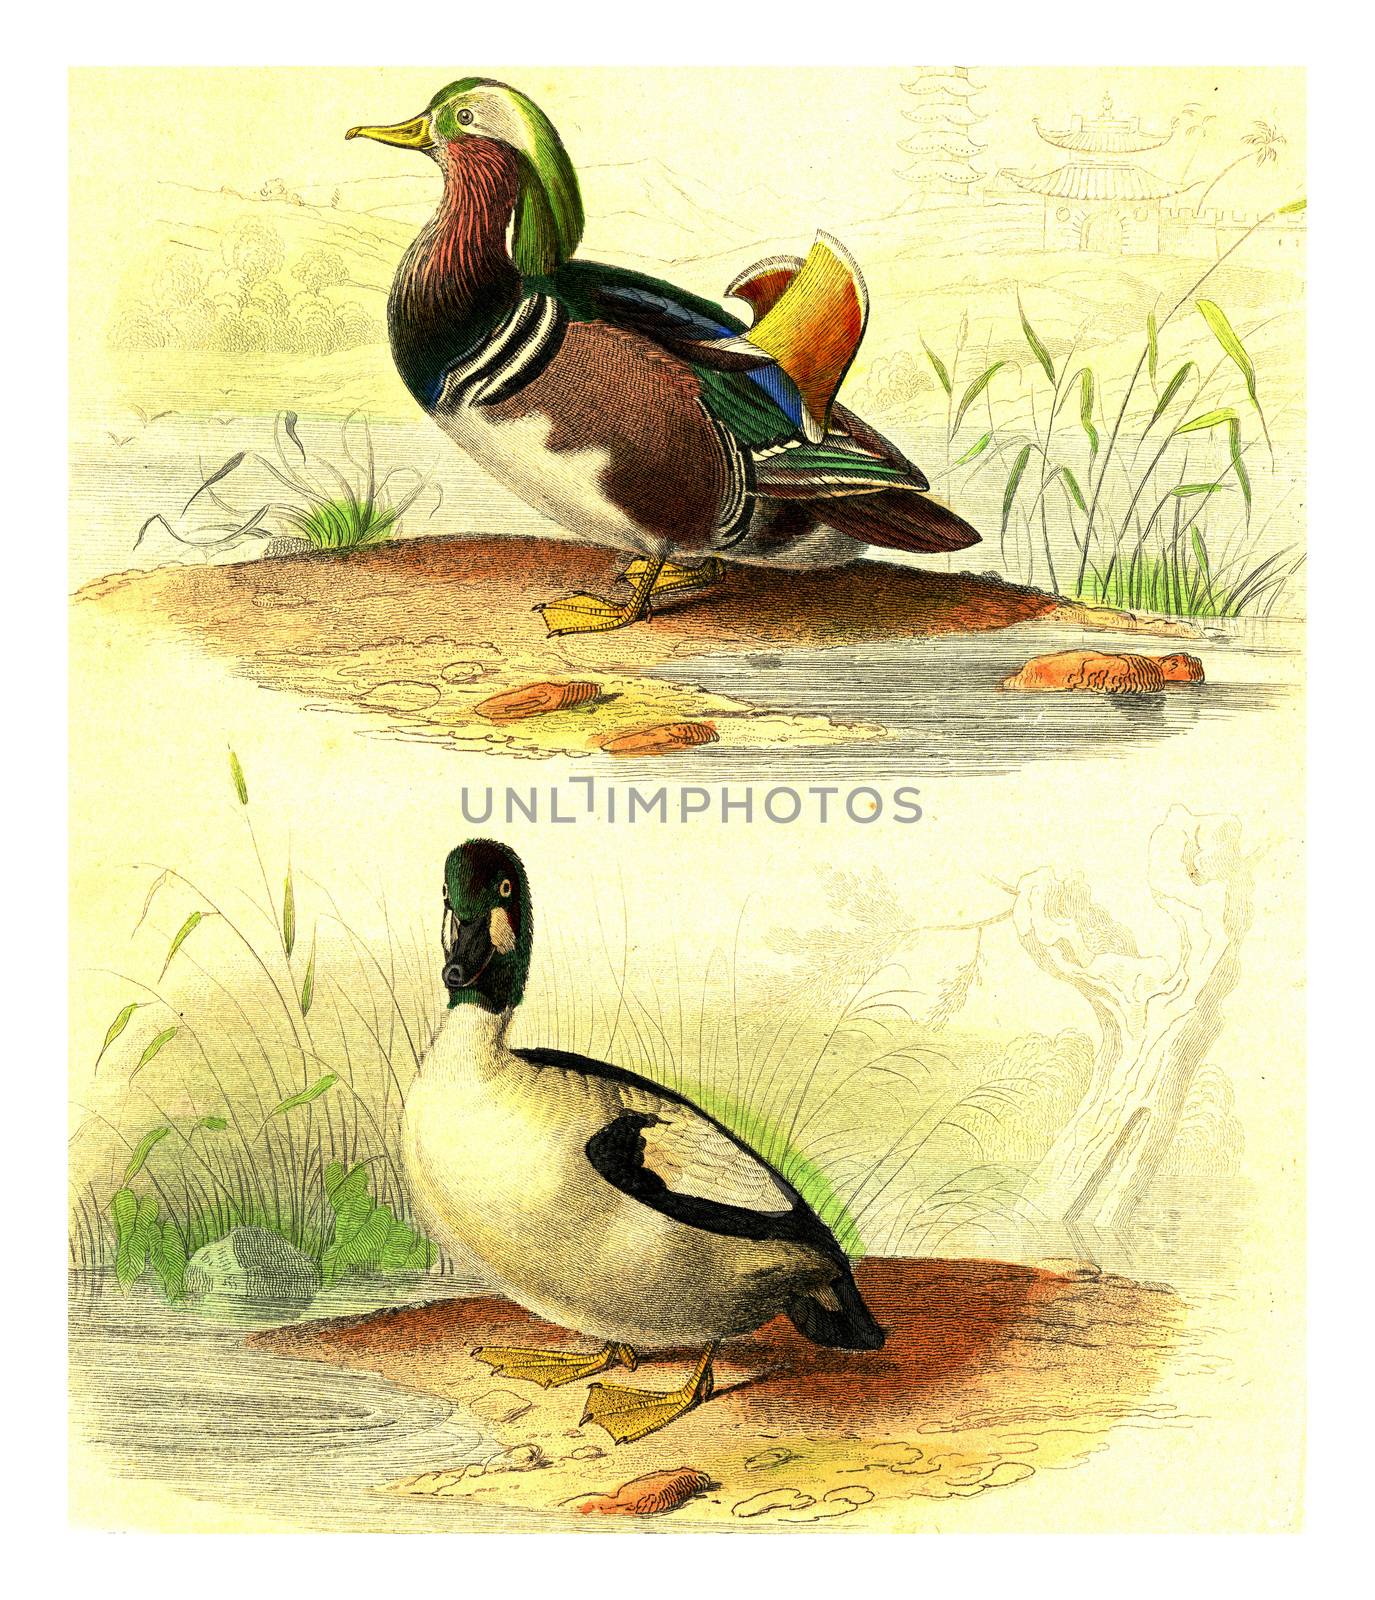 Duck range of China, The Barrow, vintage engraving. by Morphart